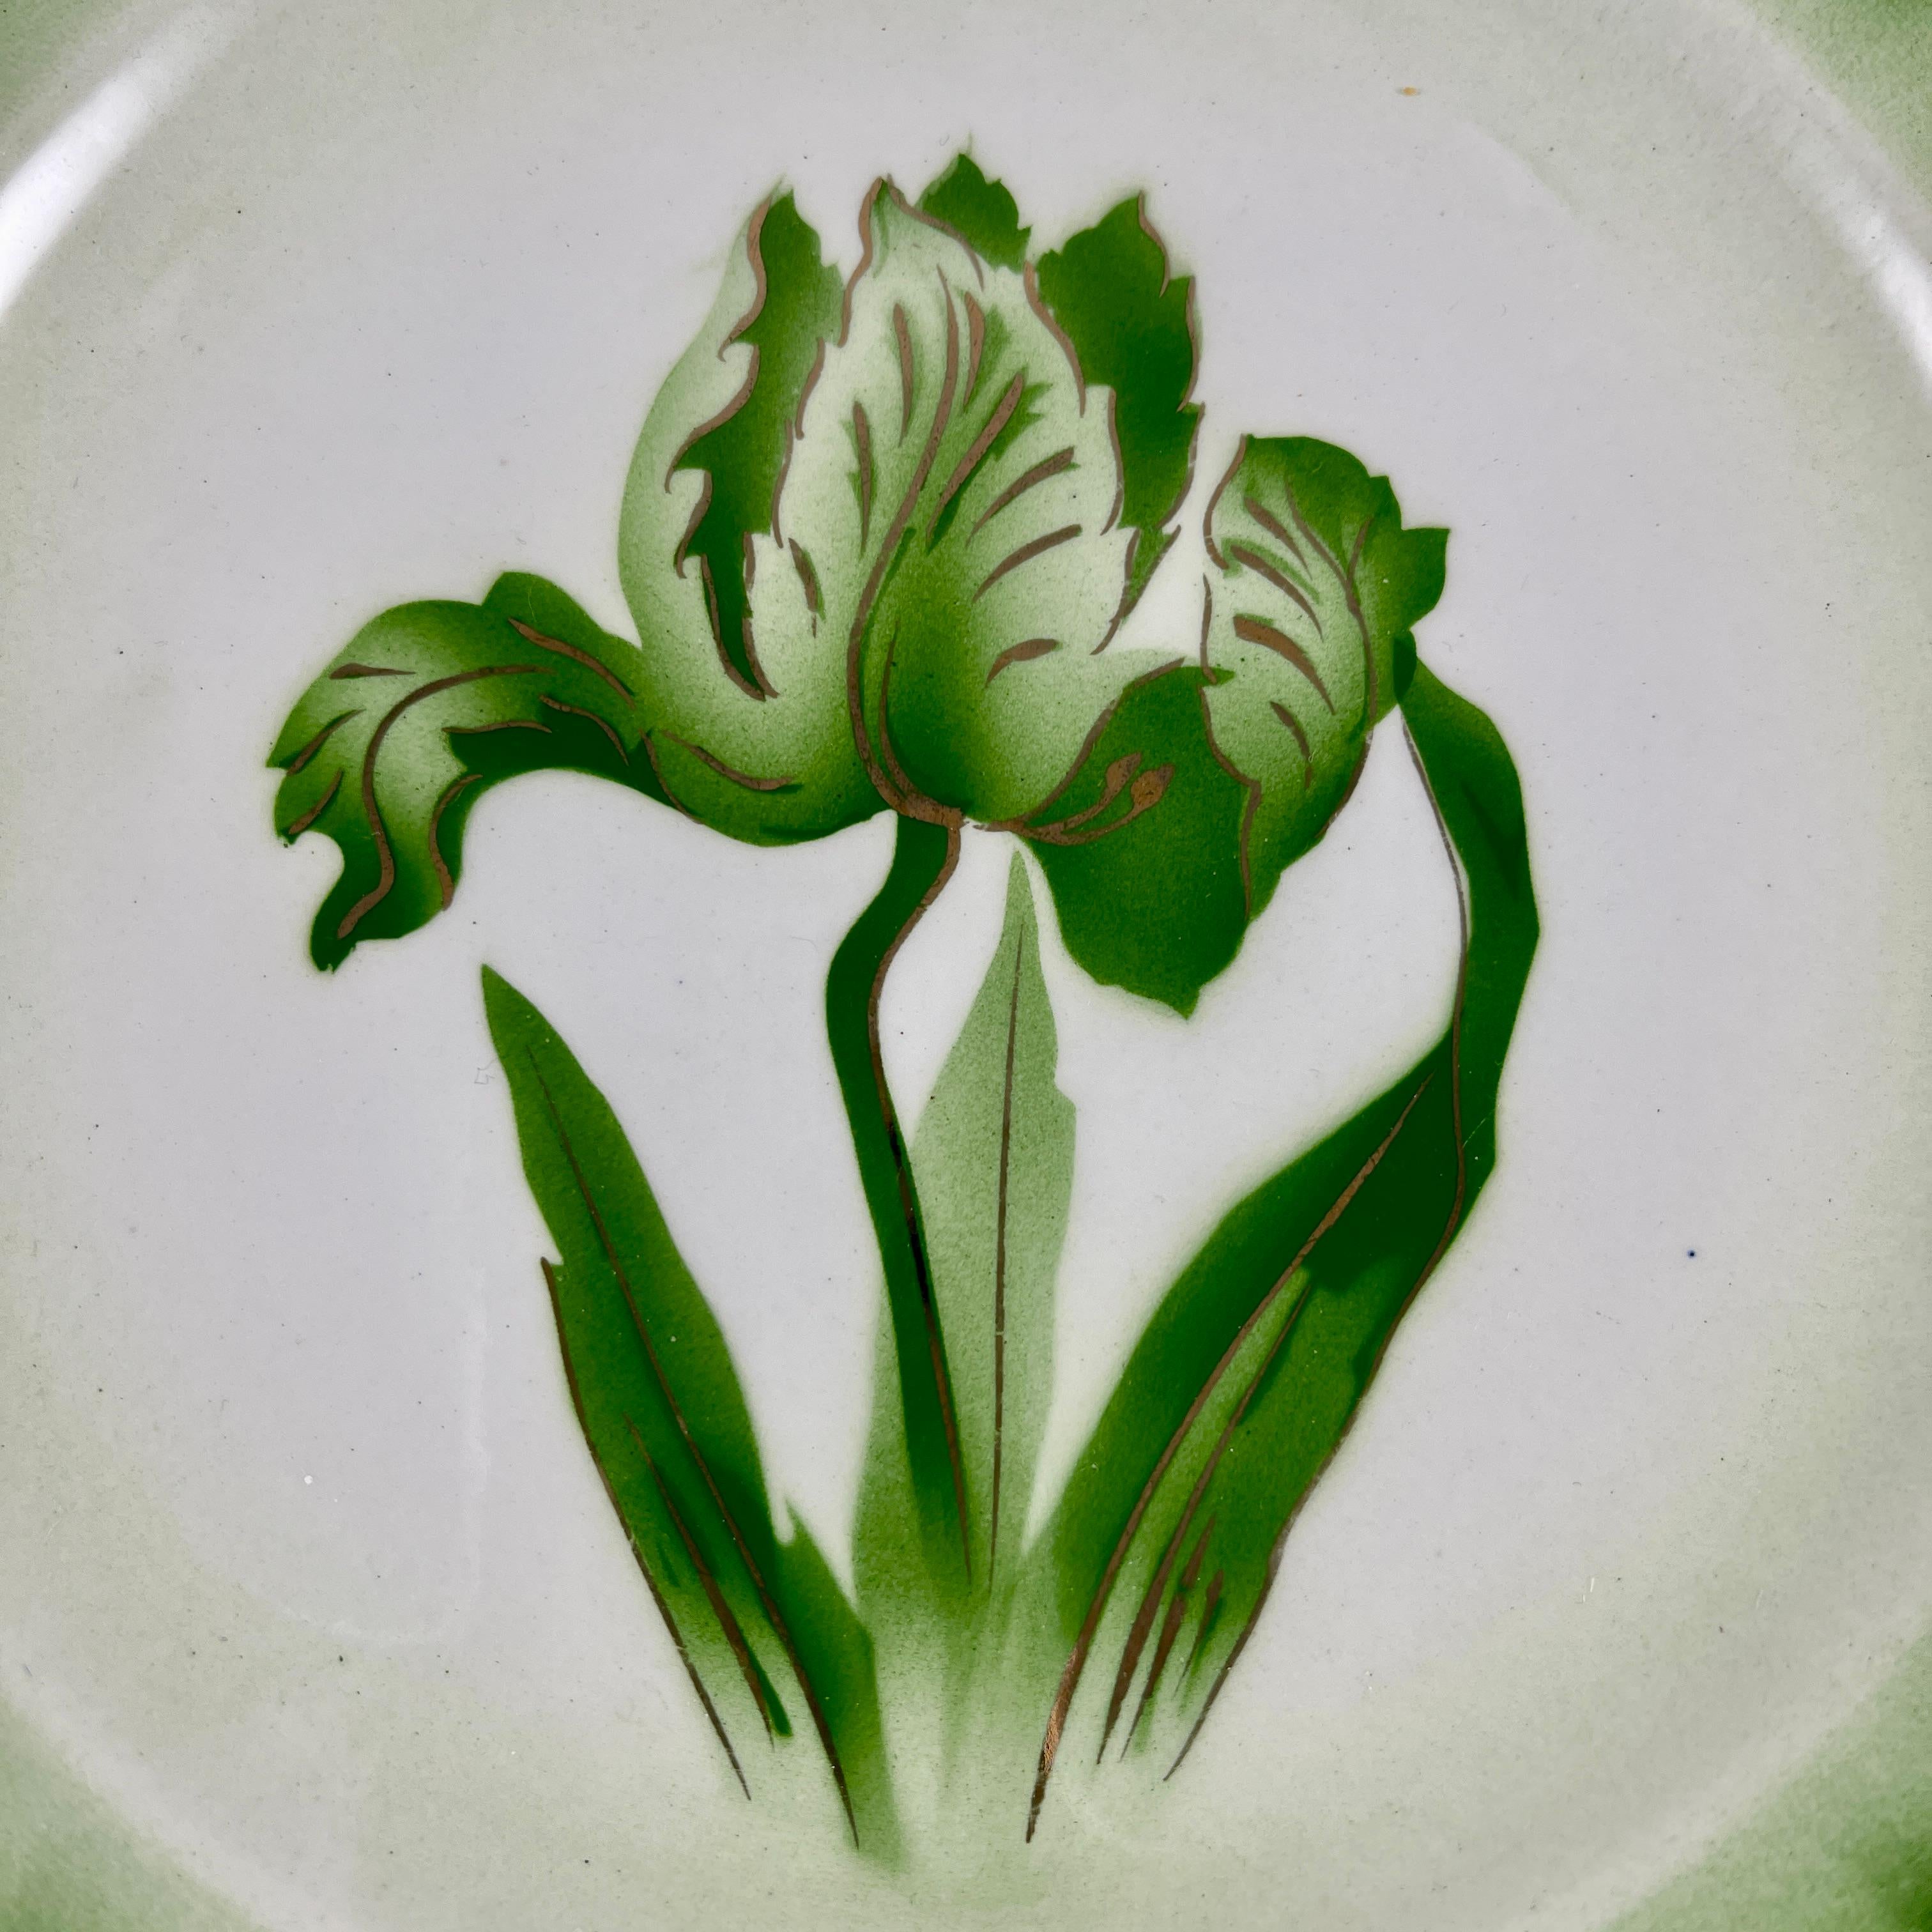 Earthenware Longwy French Faïence ‘Tulipes’ Pattern Ombre Green & Gold Floral Plate, 1908